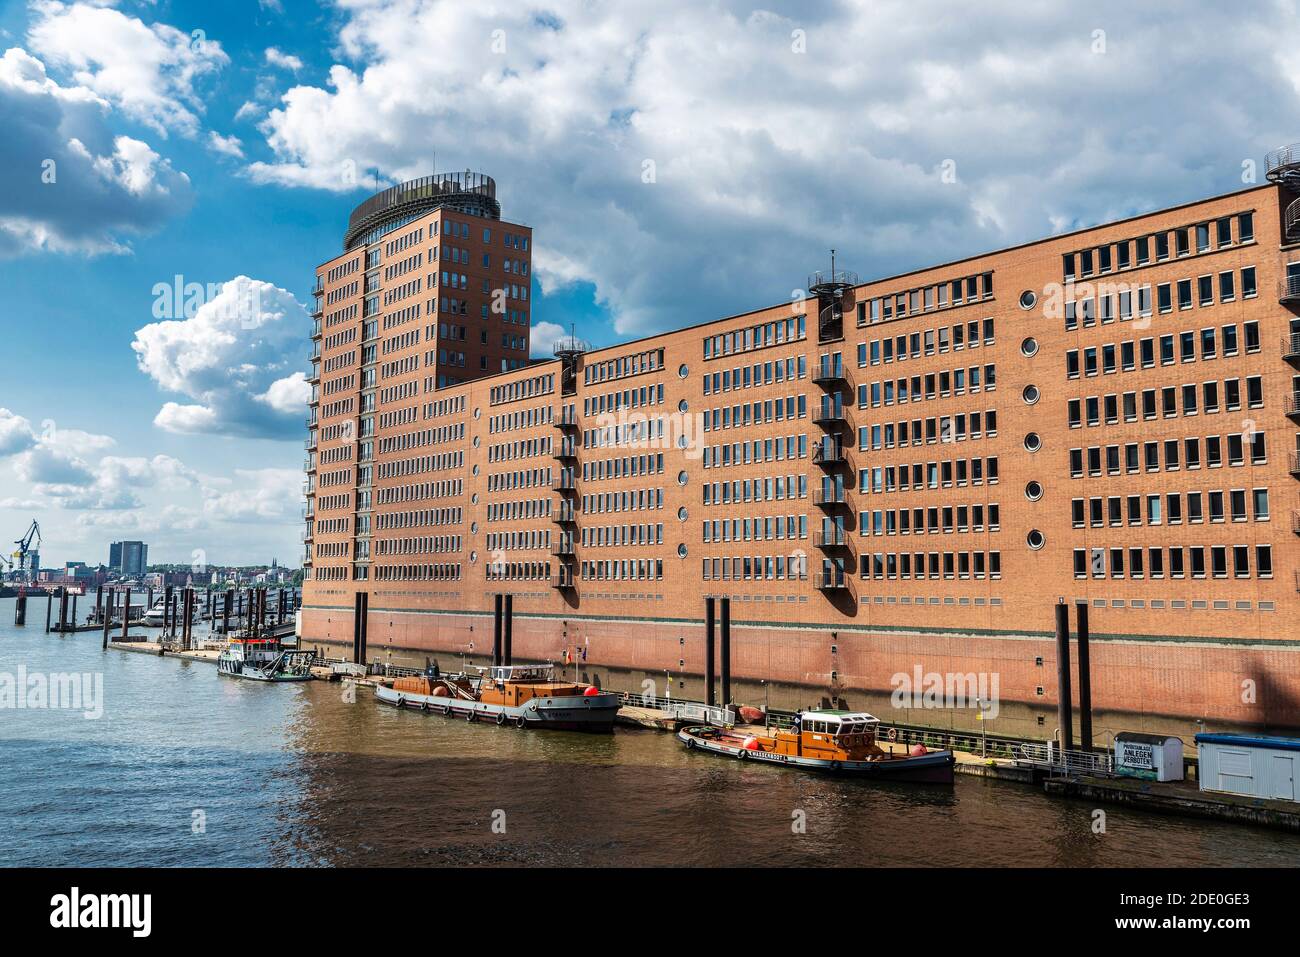 Hamburg, Germany - August 21, 2019: Hanseatic Trade Center (HTC) and Columbus Haus, modern office building in HafenCity, in the port of Hamburg, Germa Stock Photo